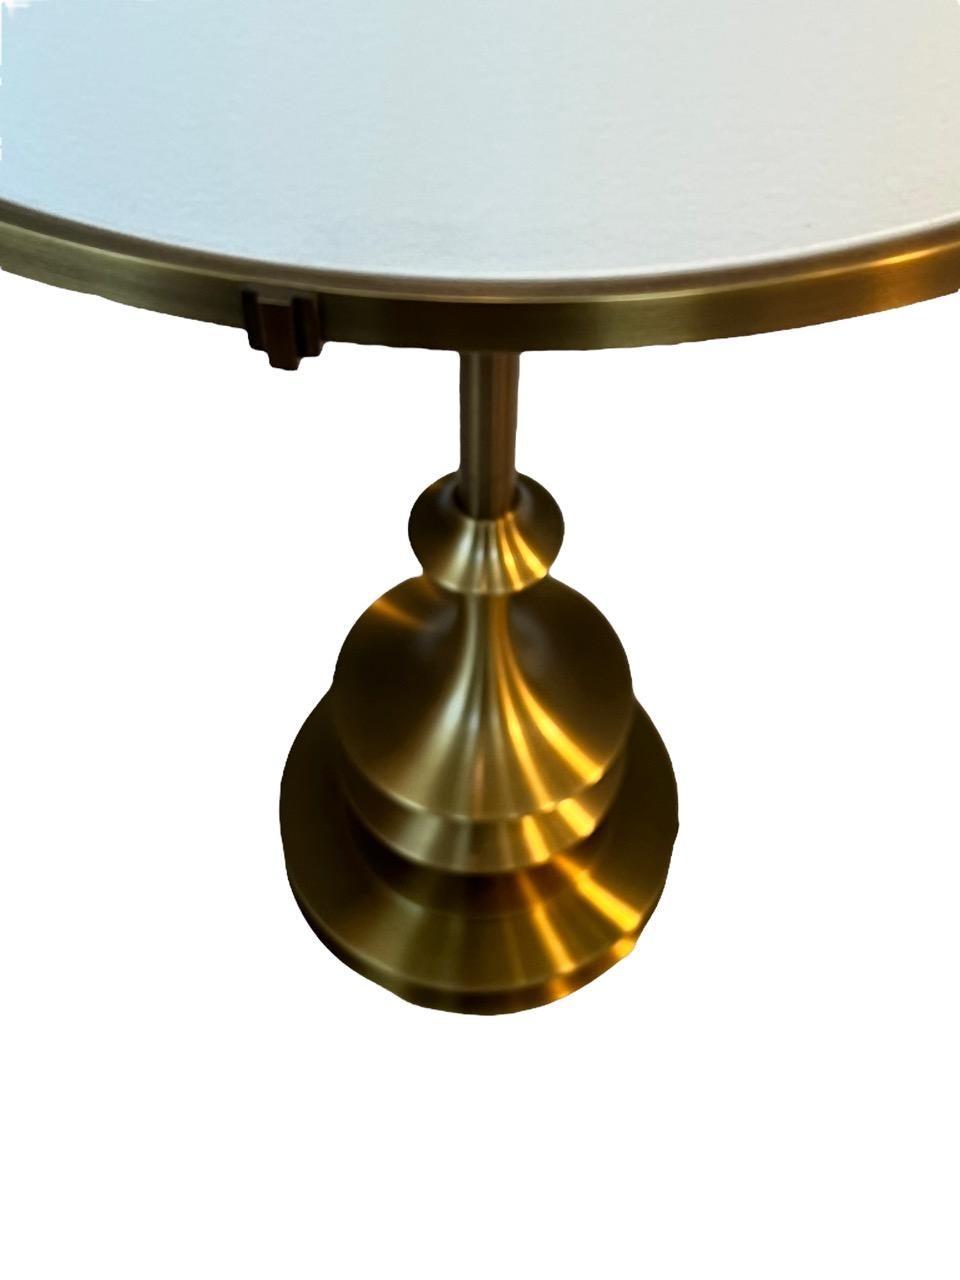 Contemporary Pair of Side Table Lamps, Solid Brass by Designer Solis Betancourt 6